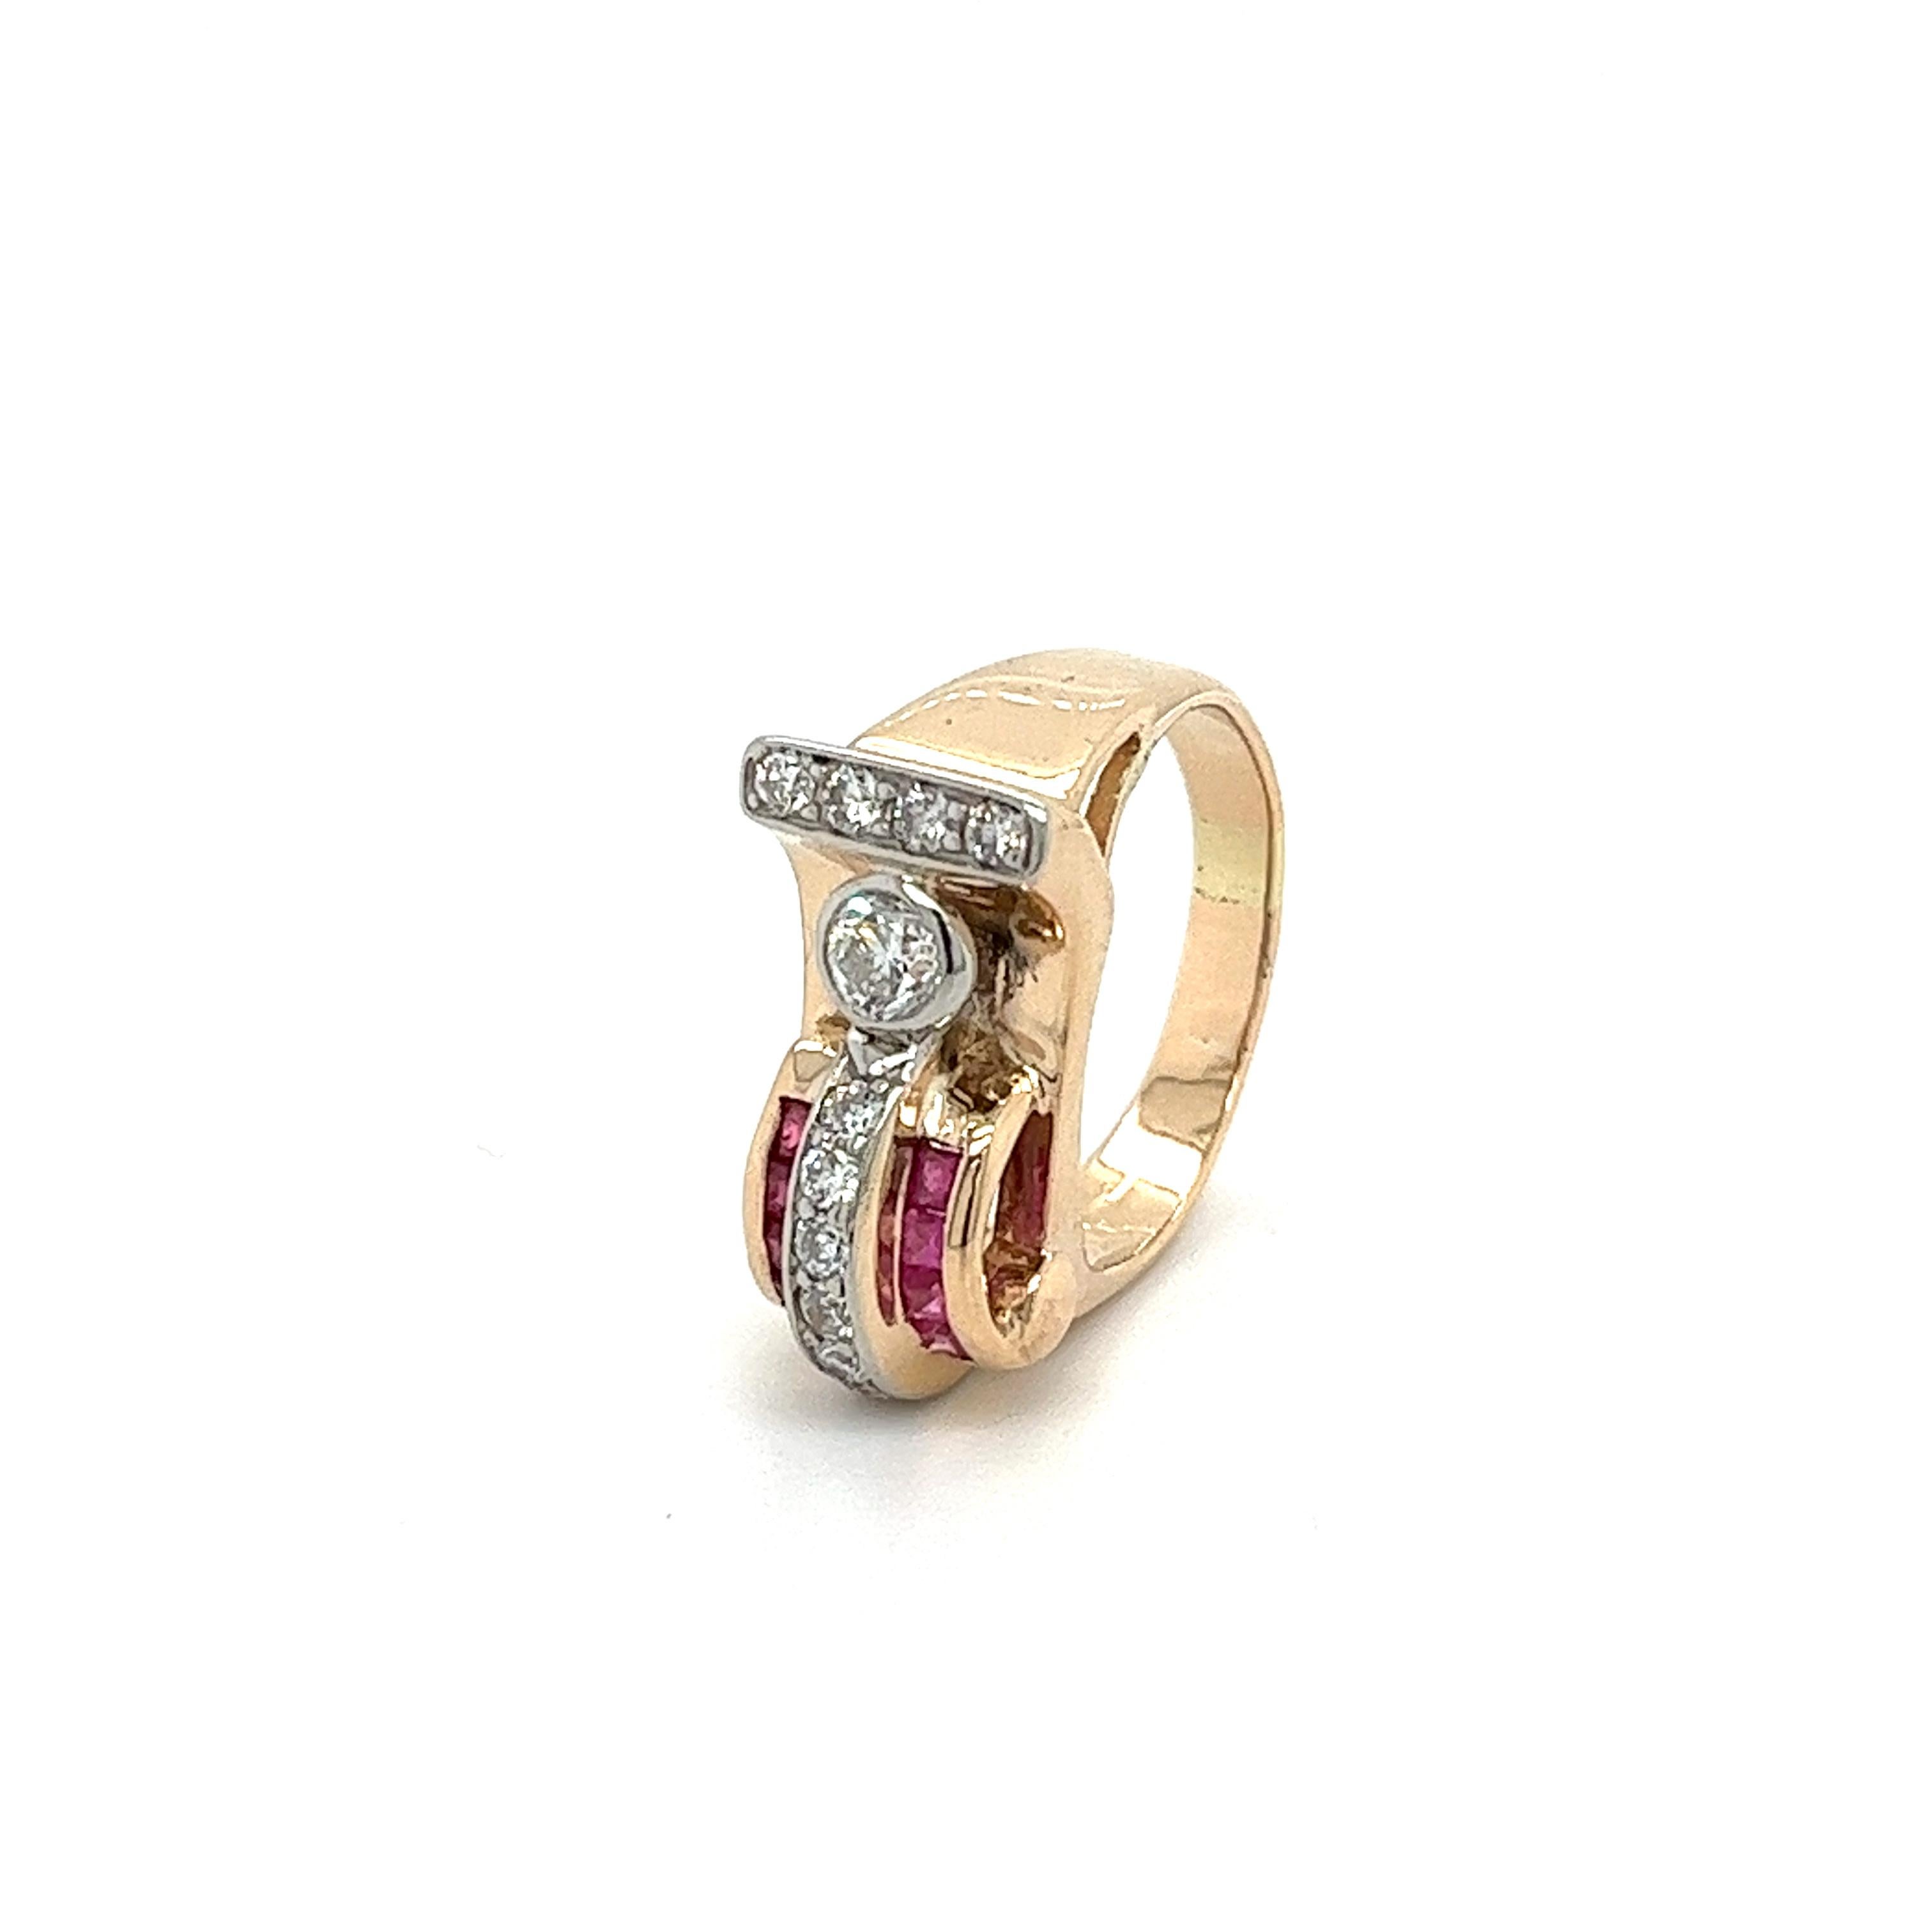 Vintage 14k Gold Retro Style Old Euro Cut Diamond and Baguette Cut Ruby Ring In Good Condition For Sale In Miami, FL